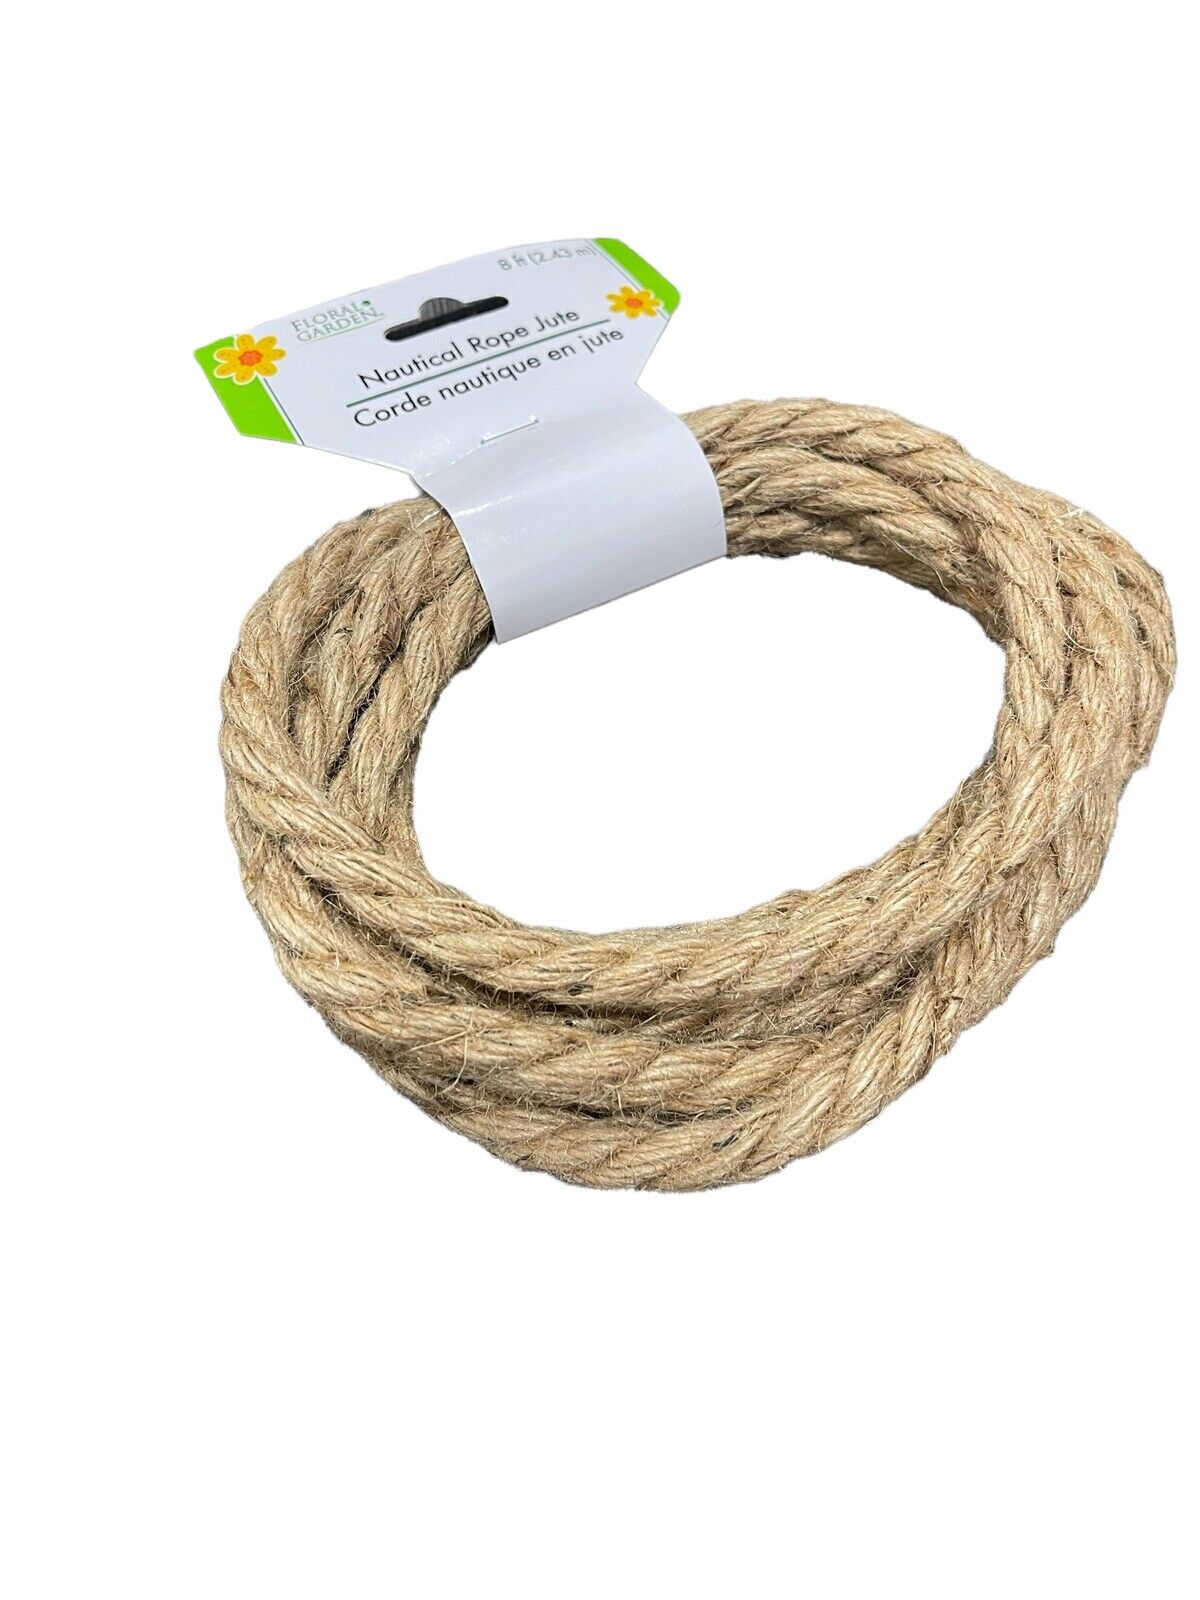 2 Decorative Nautical Rope, DIY Project Rope, Jute Cord 8ft Each 10mm Total 16ft